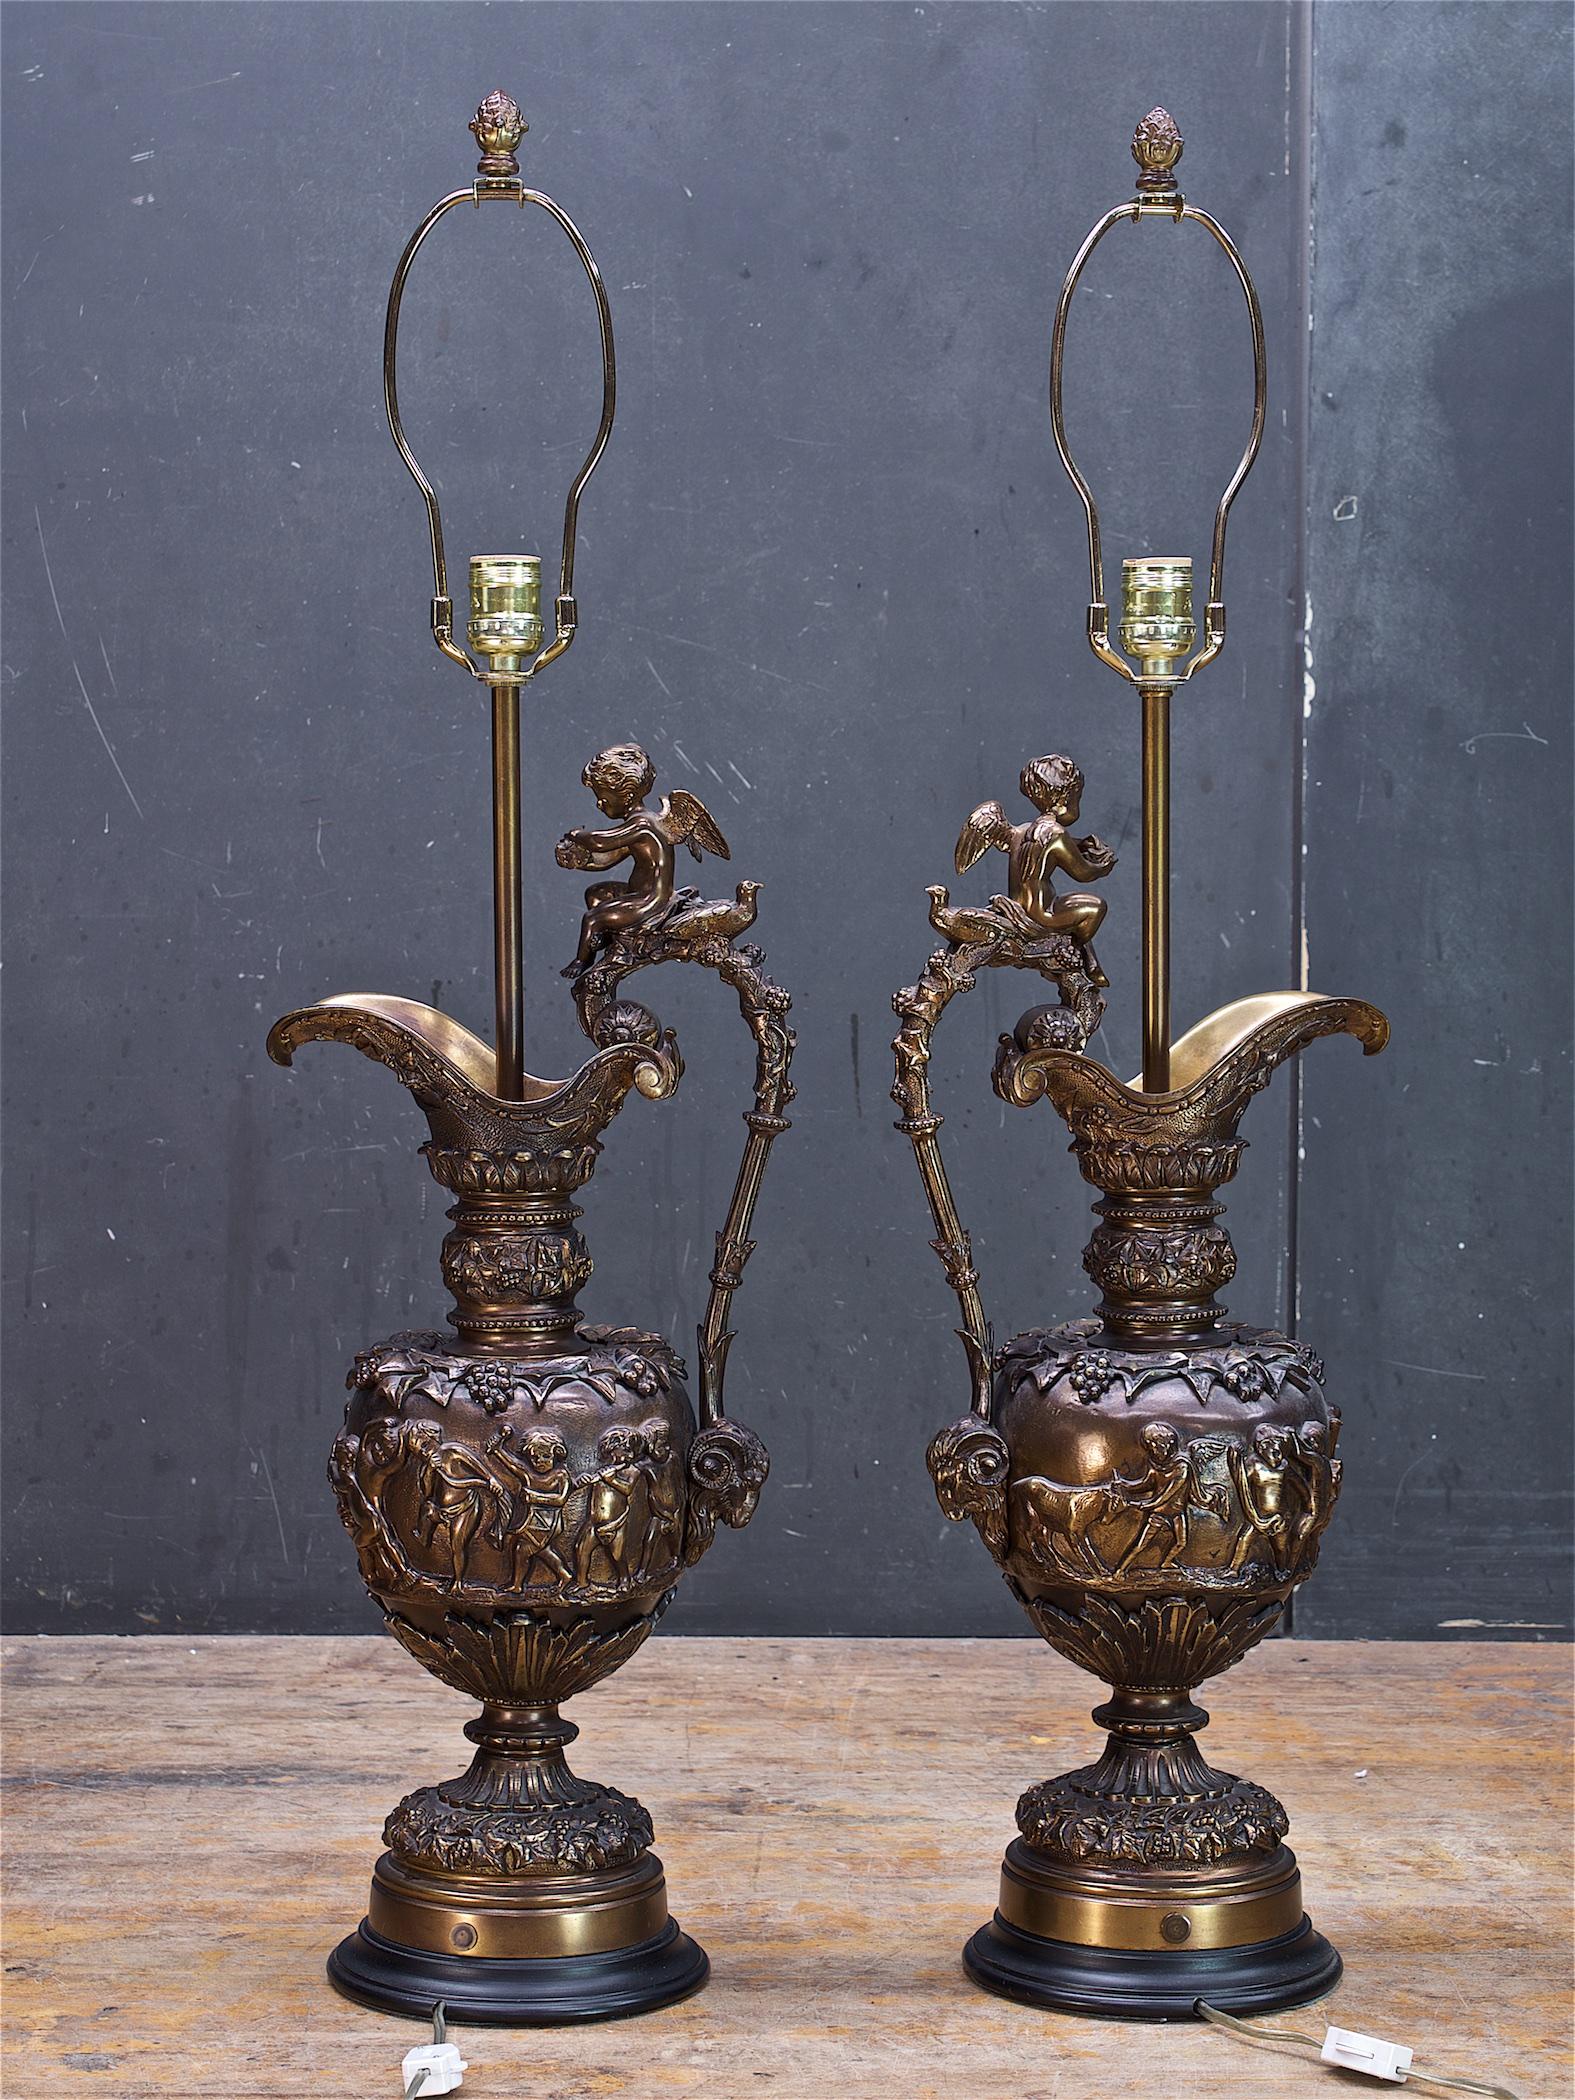 A pair of very heavy bronze lamps. New Sockets and wiring, line switches, plugs. US standard plugs. Includes original matching bronze finials. The shades are soiled and not included, but if you want them let me know, they will have to be shipped